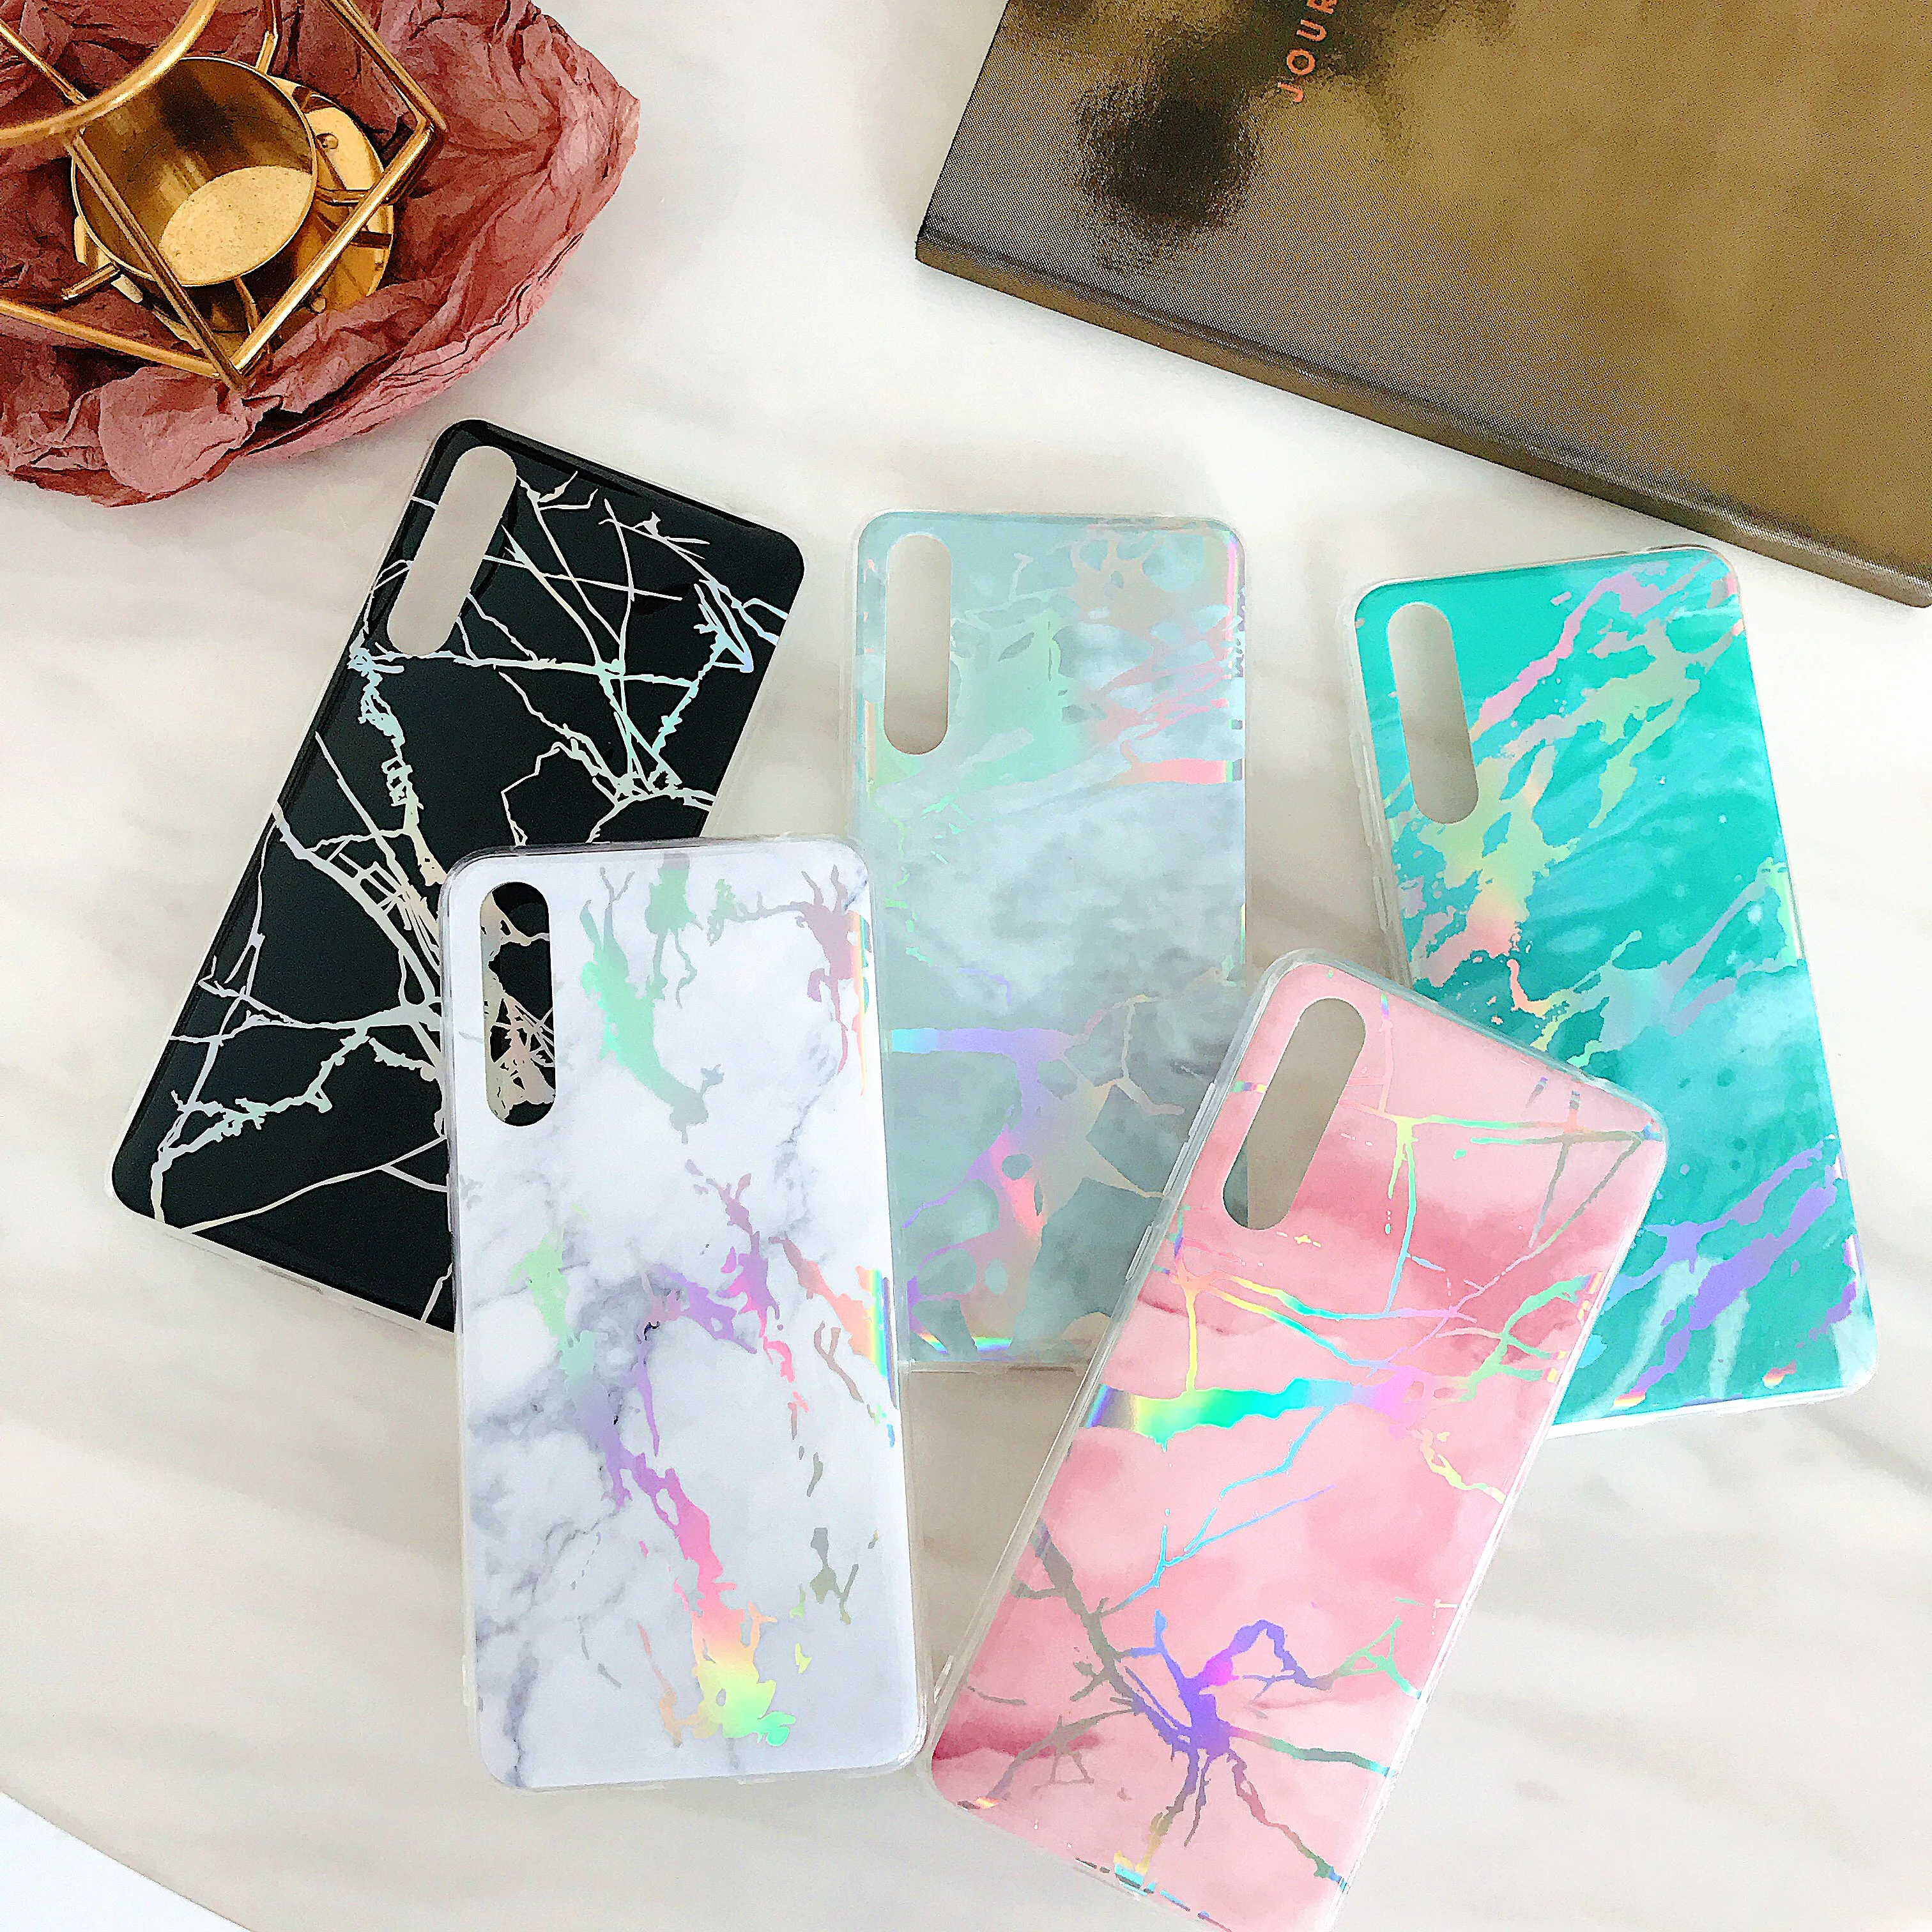 

Laser Glossy Marble phone Case For Huawei Honor 10 7C Nova 2 2S 3 3i 3e Mate 20 P30 P20 Y5 Y6 Y7 Prime Pro Plus Lite Edge 2018